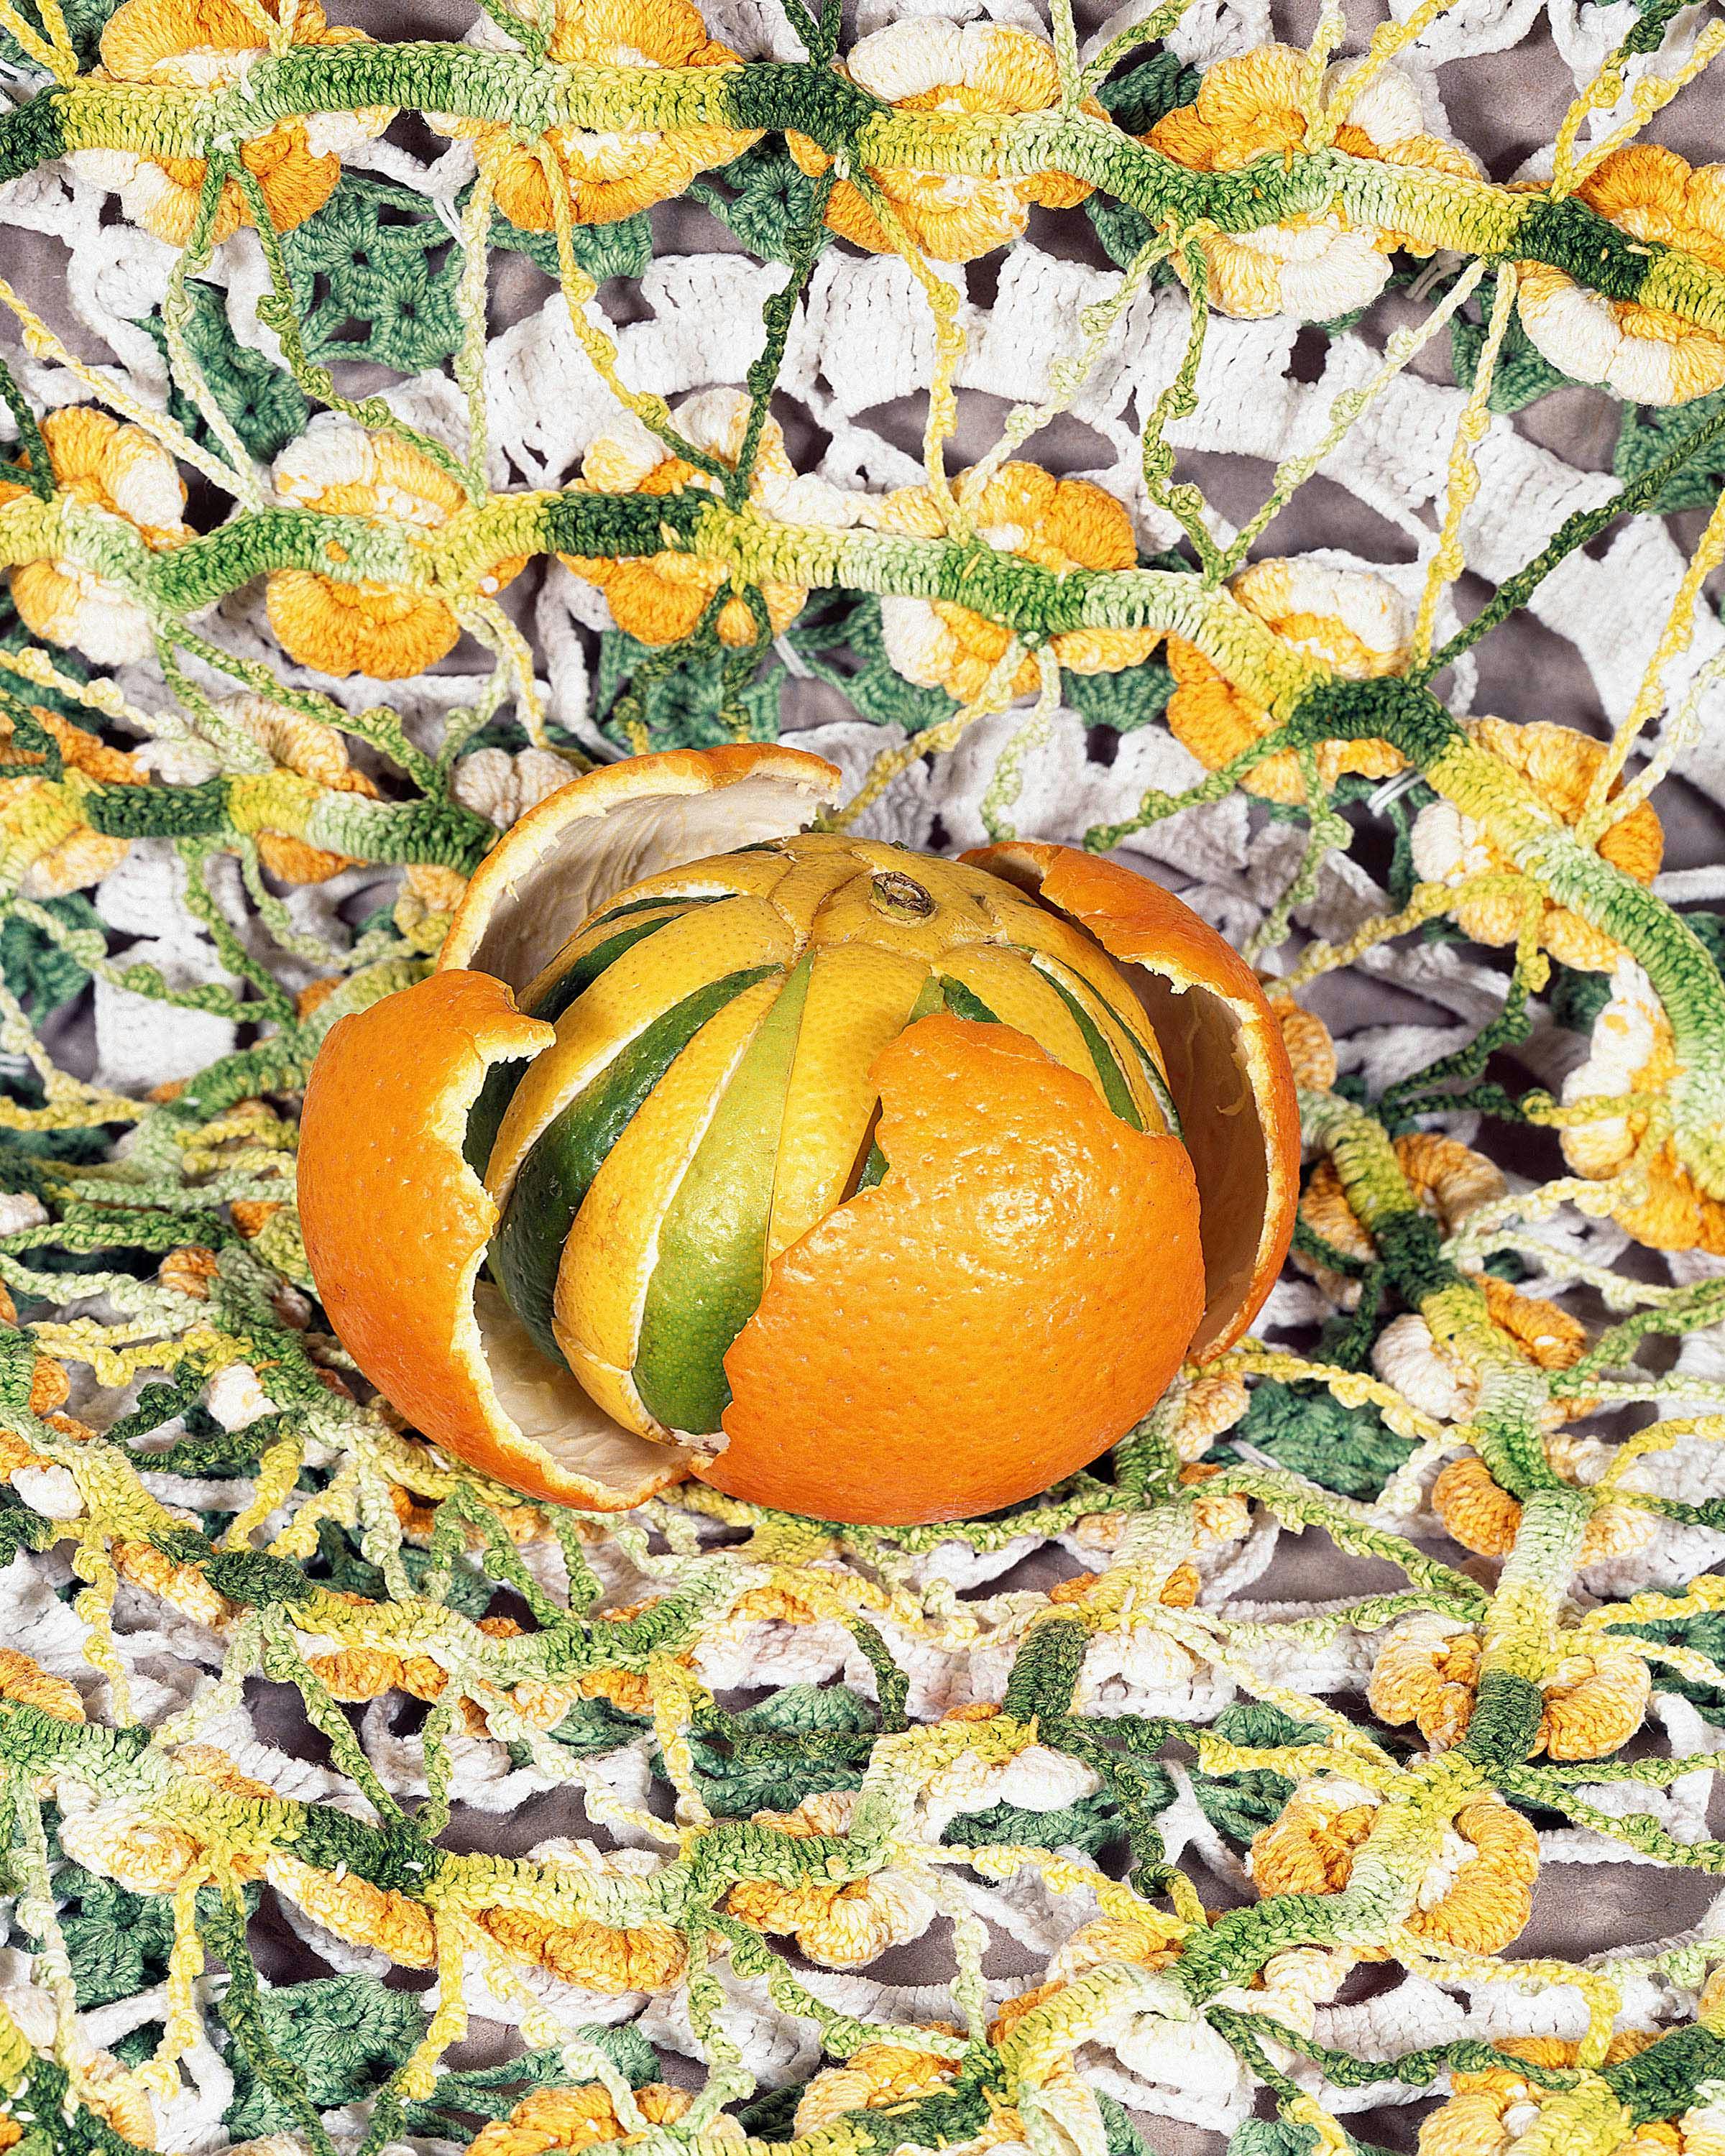 A detail of a photo-based artwork by Svava Tergesen. The image shows a food sculpture that Tergesen made out of citrus fruits. 